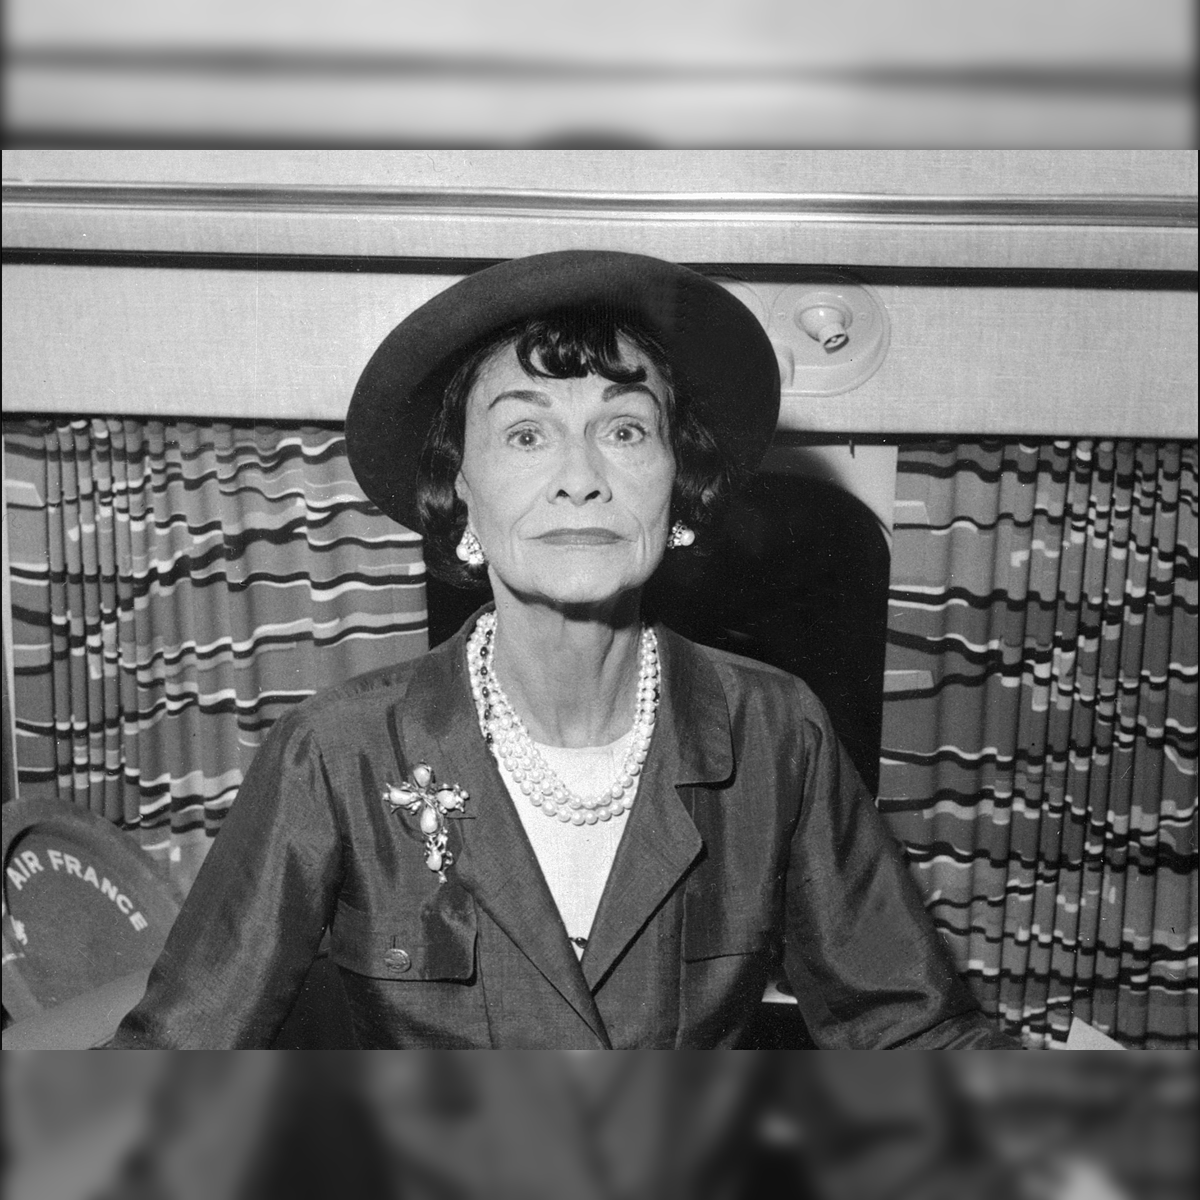 Coco Chanel spent the war at the Ritz with her lover; was working